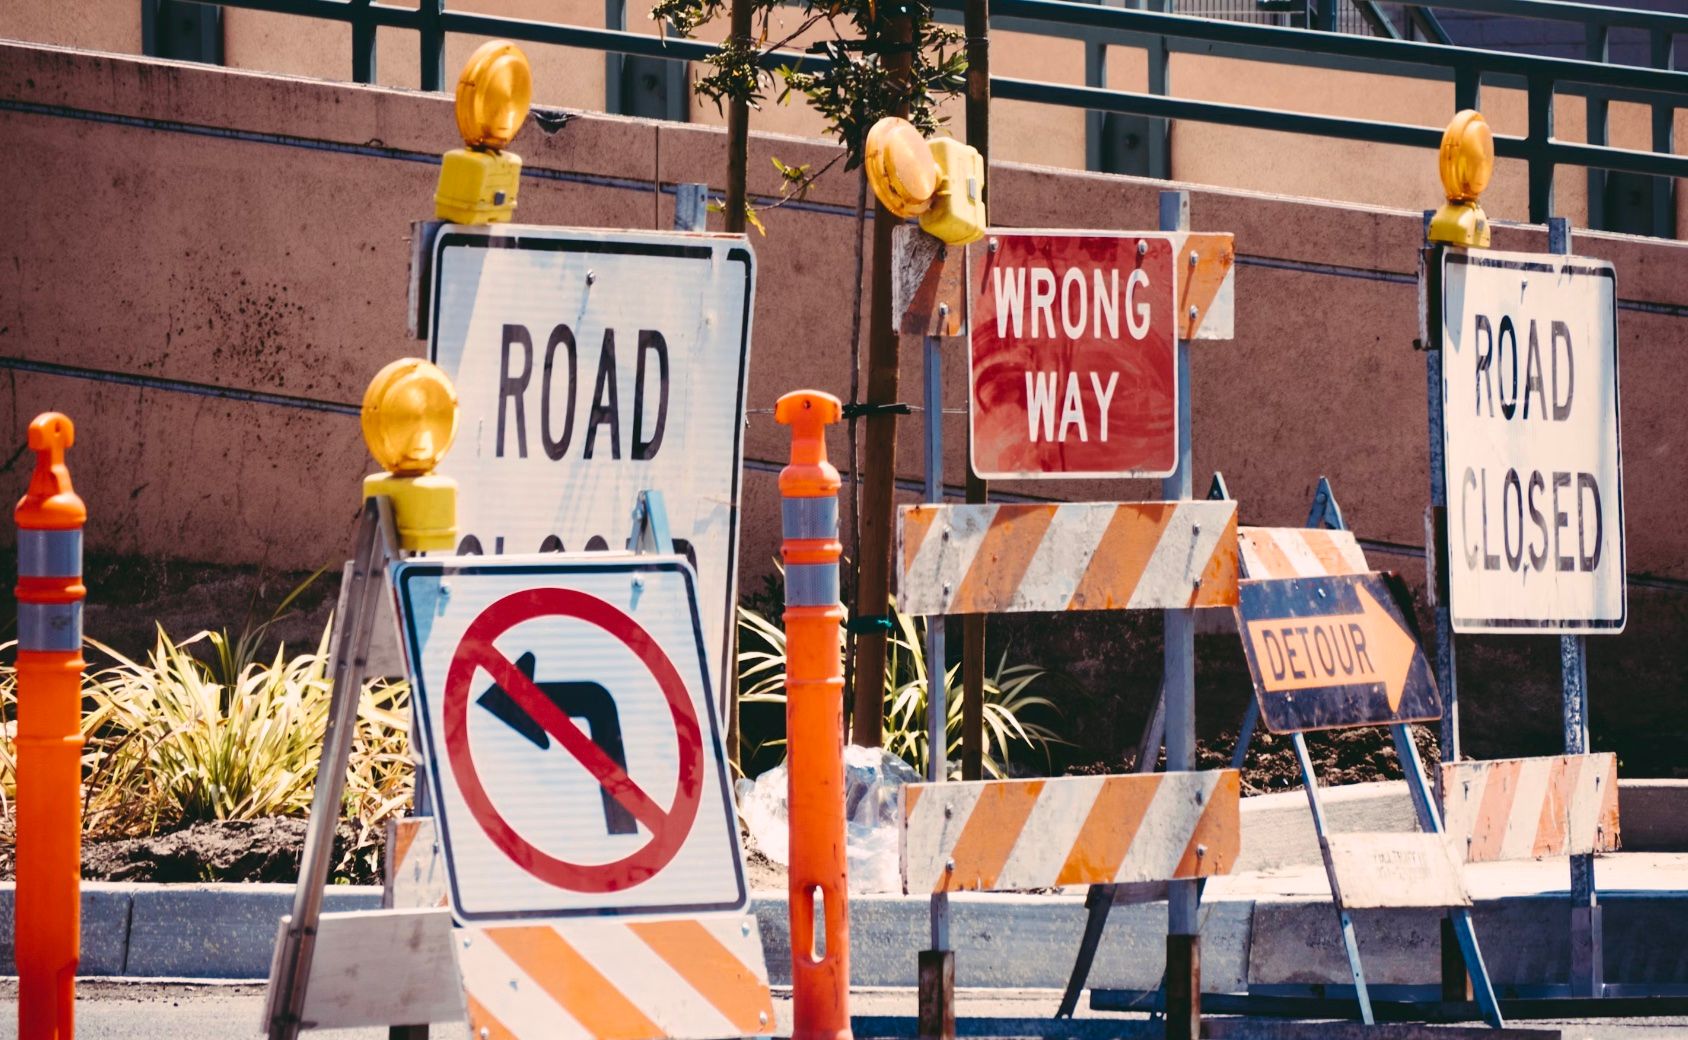 Maximizing Safety and Minimizing Risks in Road Construction Sites